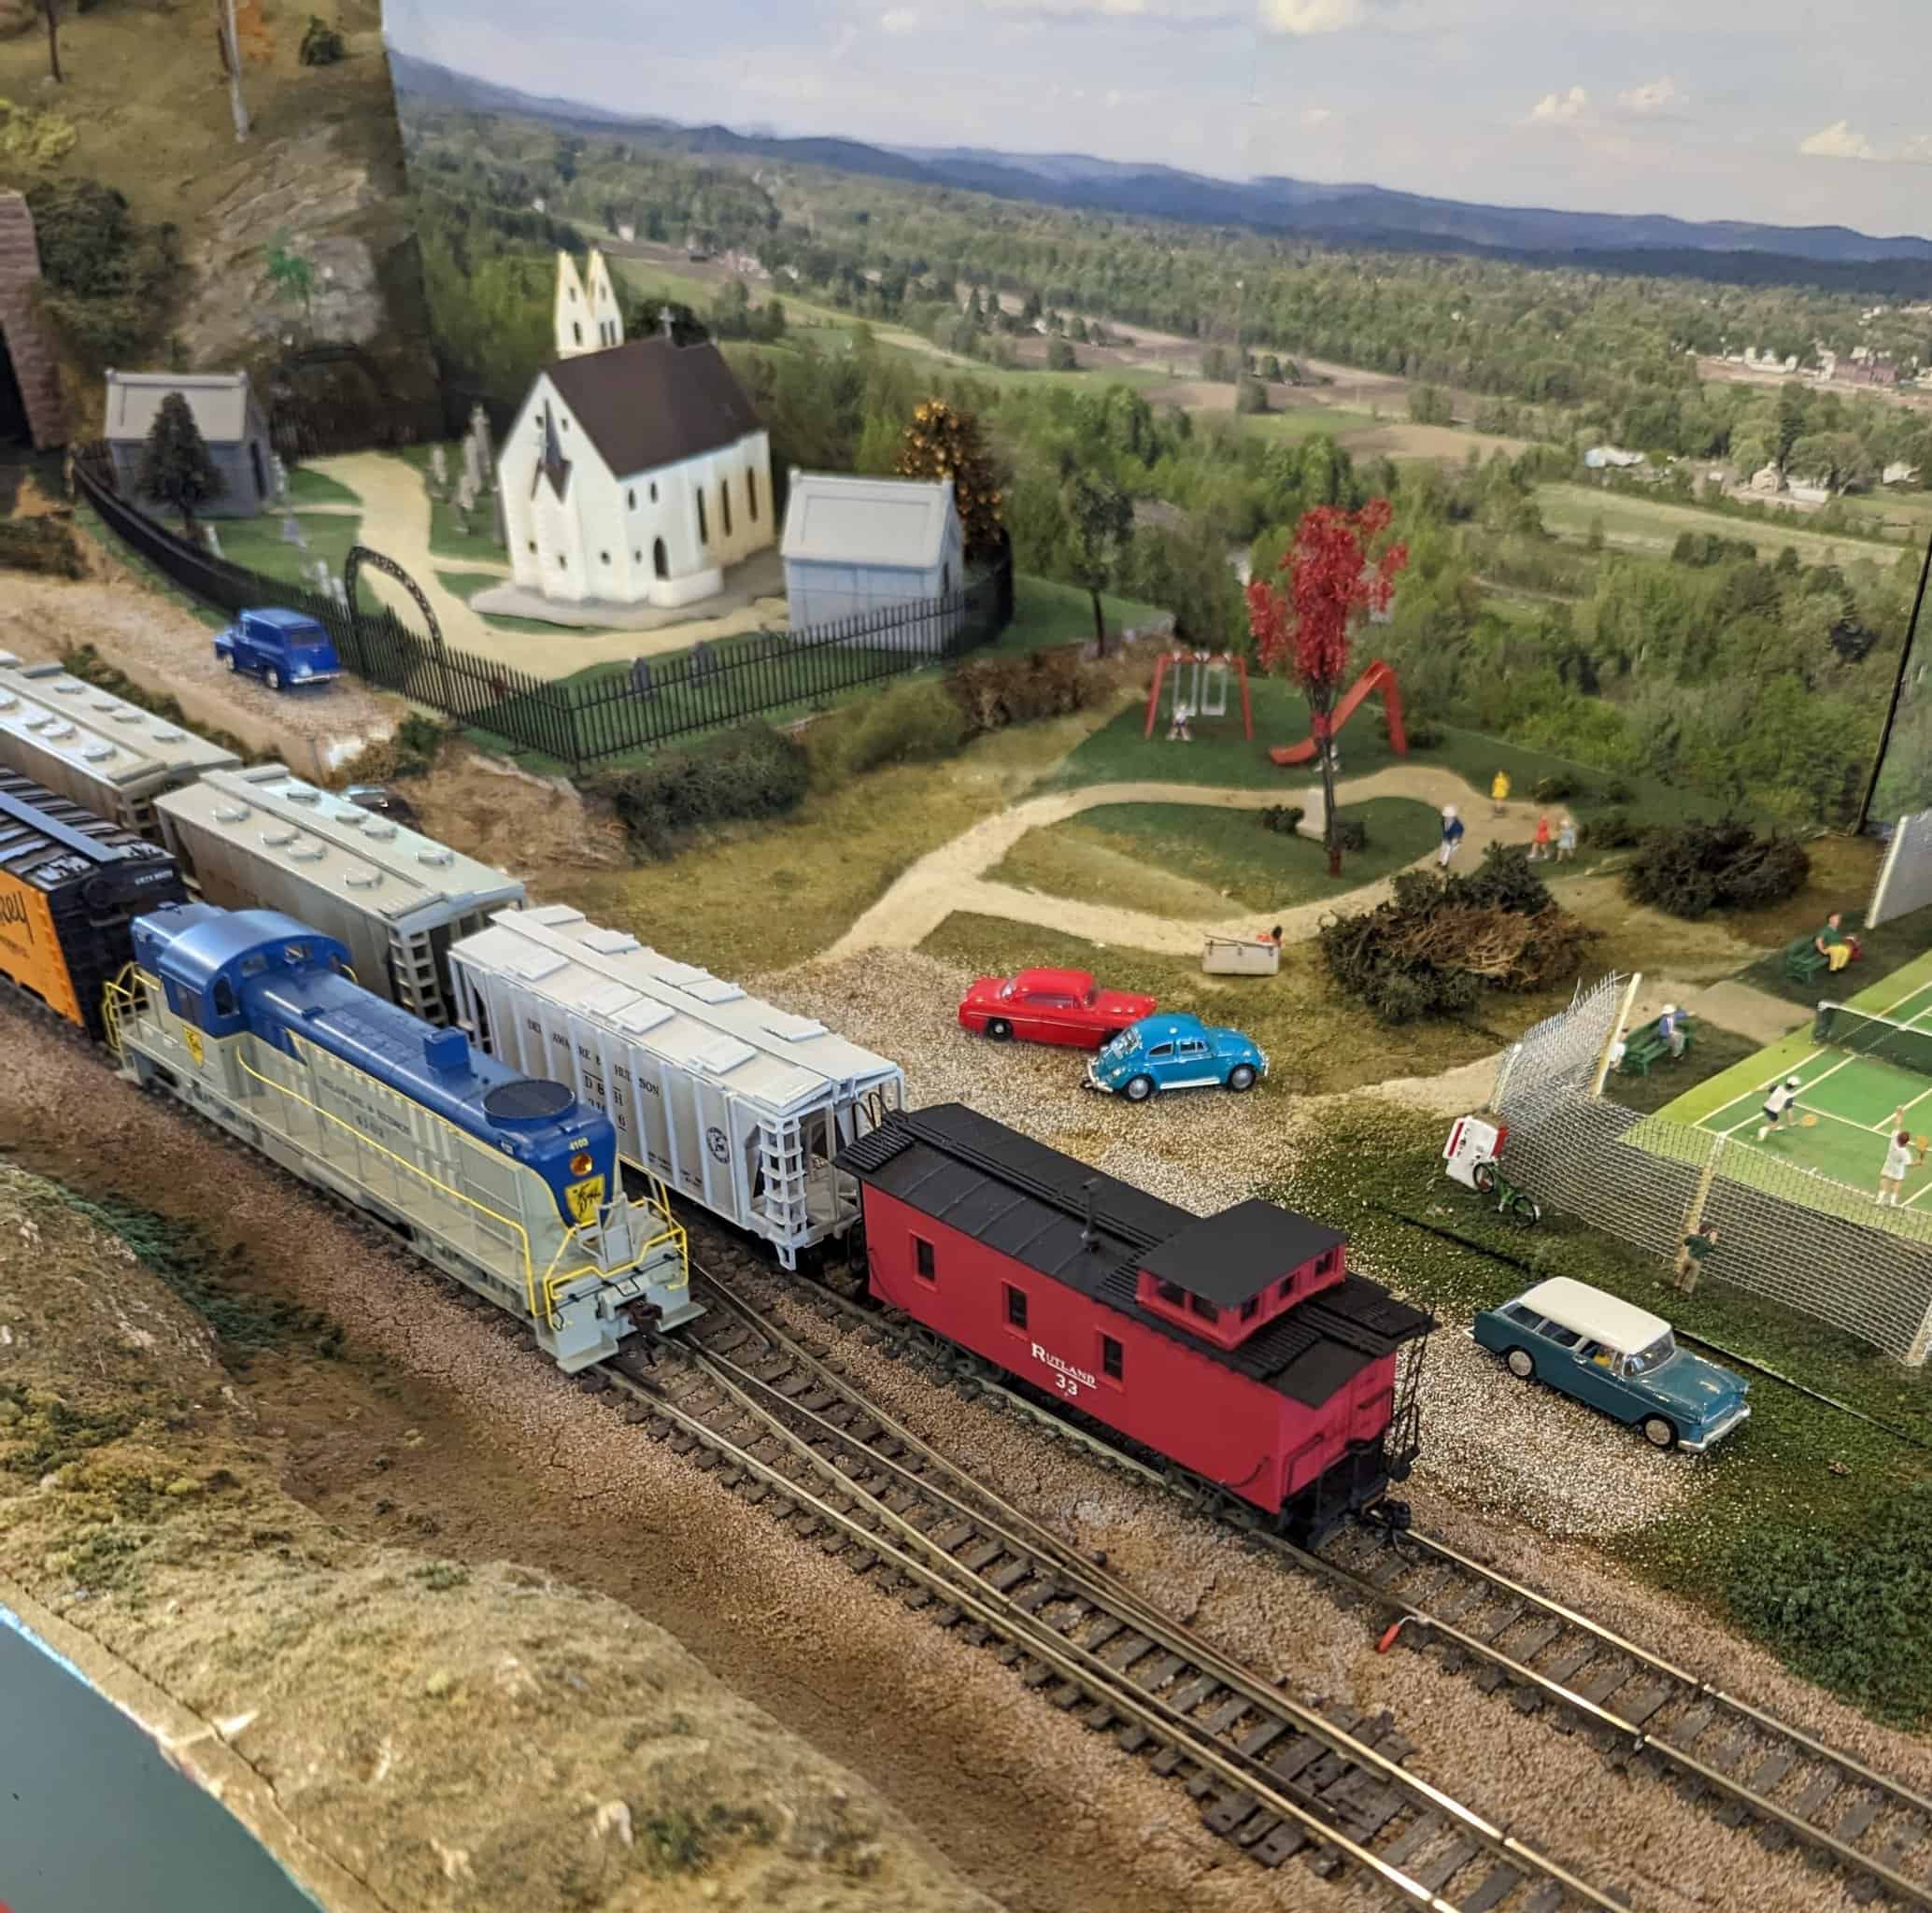 Last chance to Catch the Mode Train Exhibit at the Westford Museum!